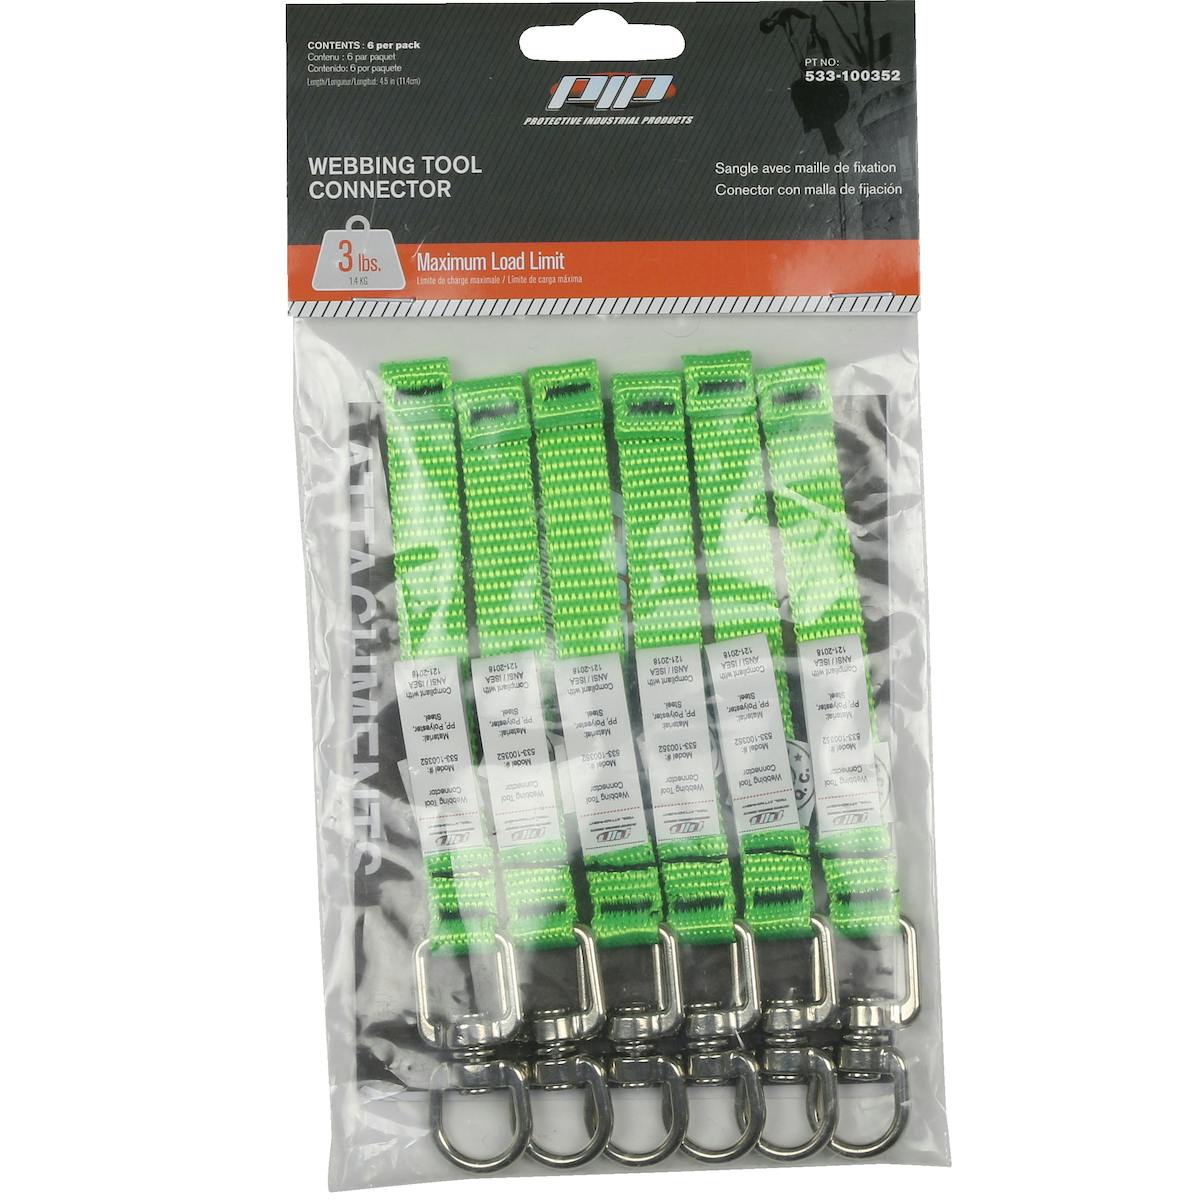 Webbing Tool Connector 4.5" - 3 lbs. maximum load limit - Retail Packaged, Green (533-100352) - OS